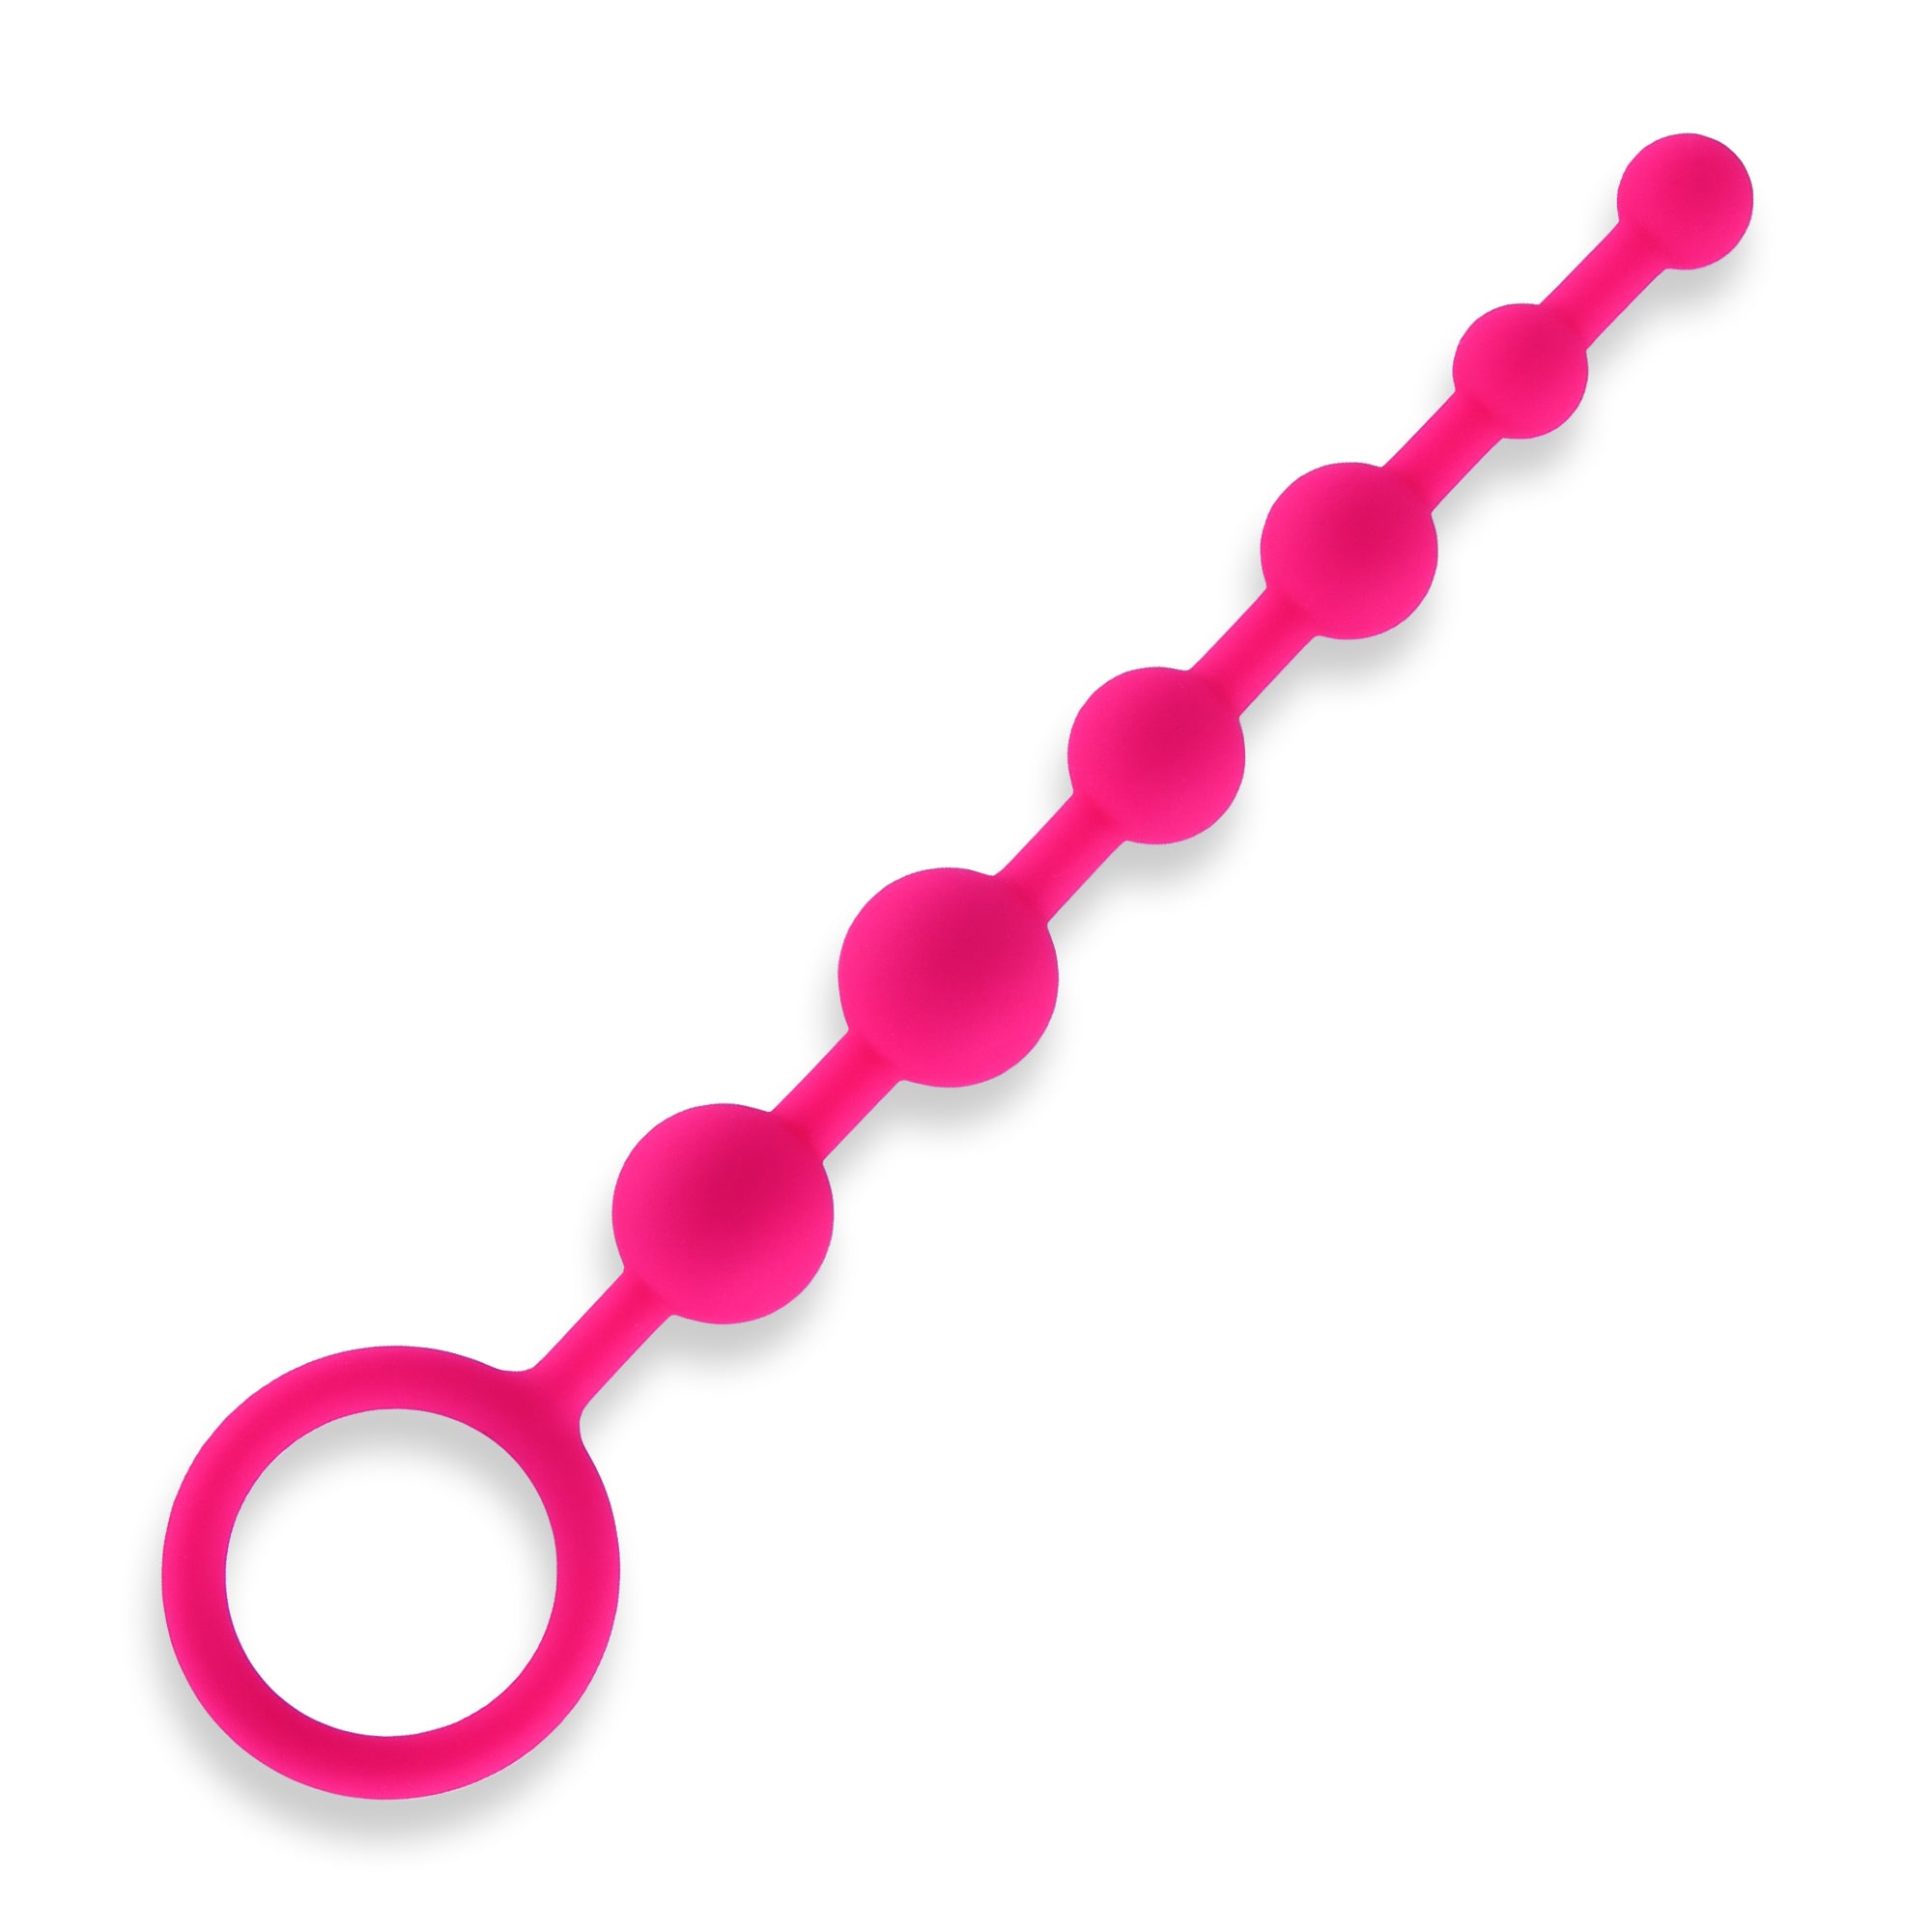 Hustler Body-Safe Silicone Anal Beads (6 Beads) in Pink at glastoy.com